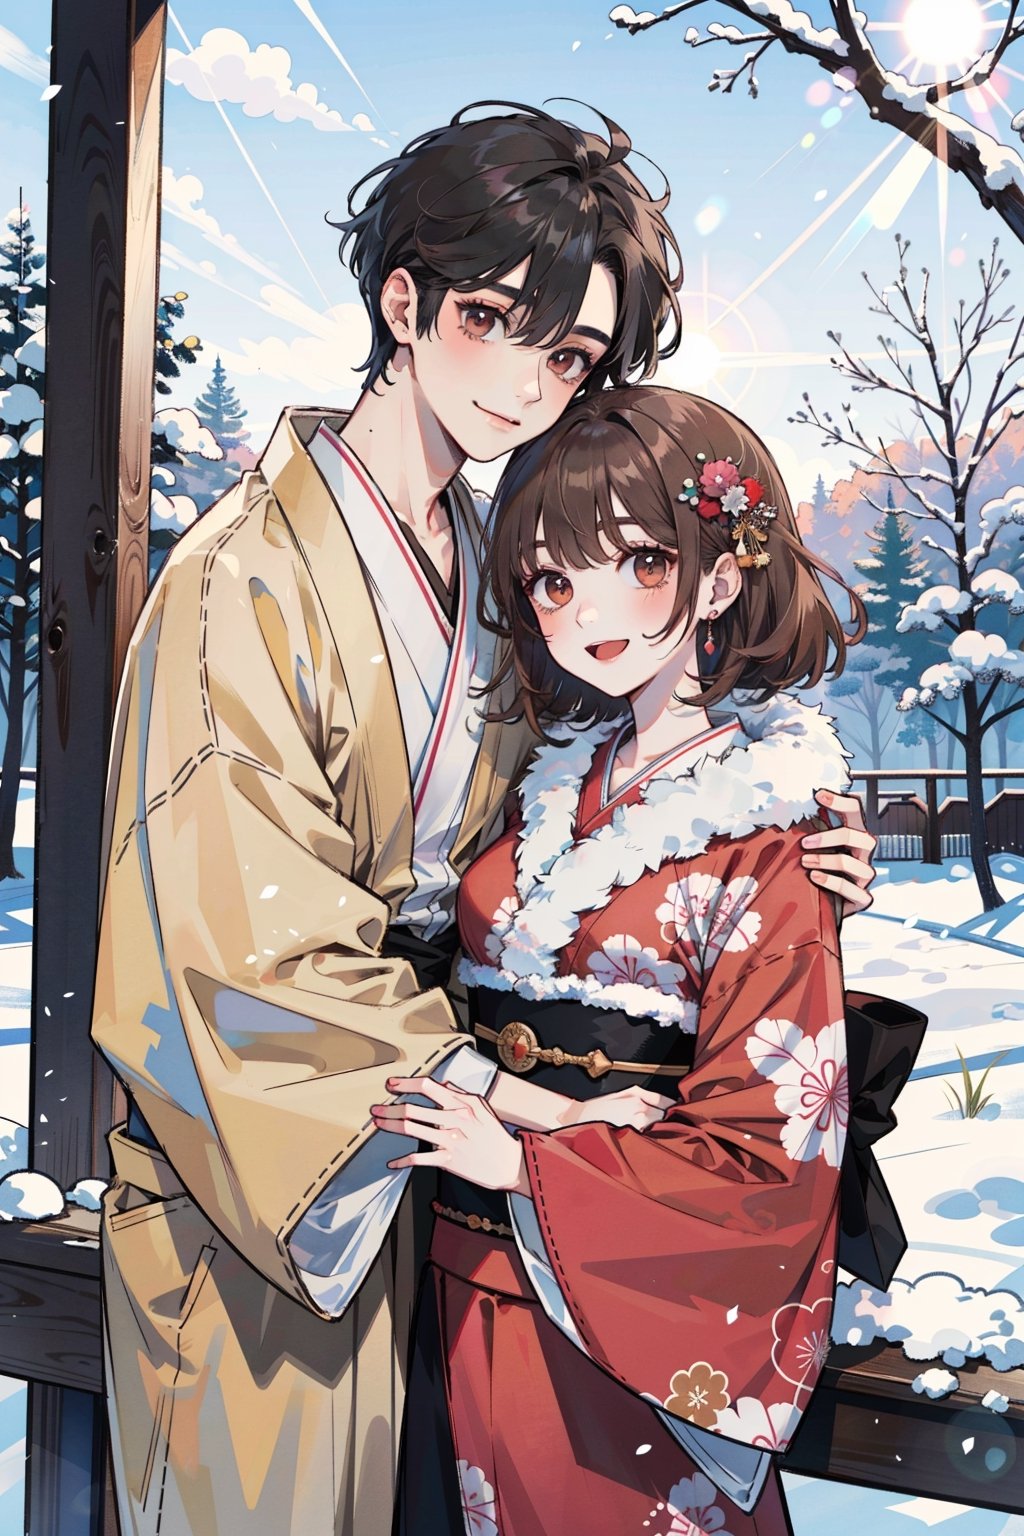 (masterpiece, best quality, highres:1.3), ultra resolution image, couple, romance, kawaii, black-hair boy and brown-hair girl, happy, cuddling, kimono, outdoor, (sunlight: 1.3), winter, natural accessories